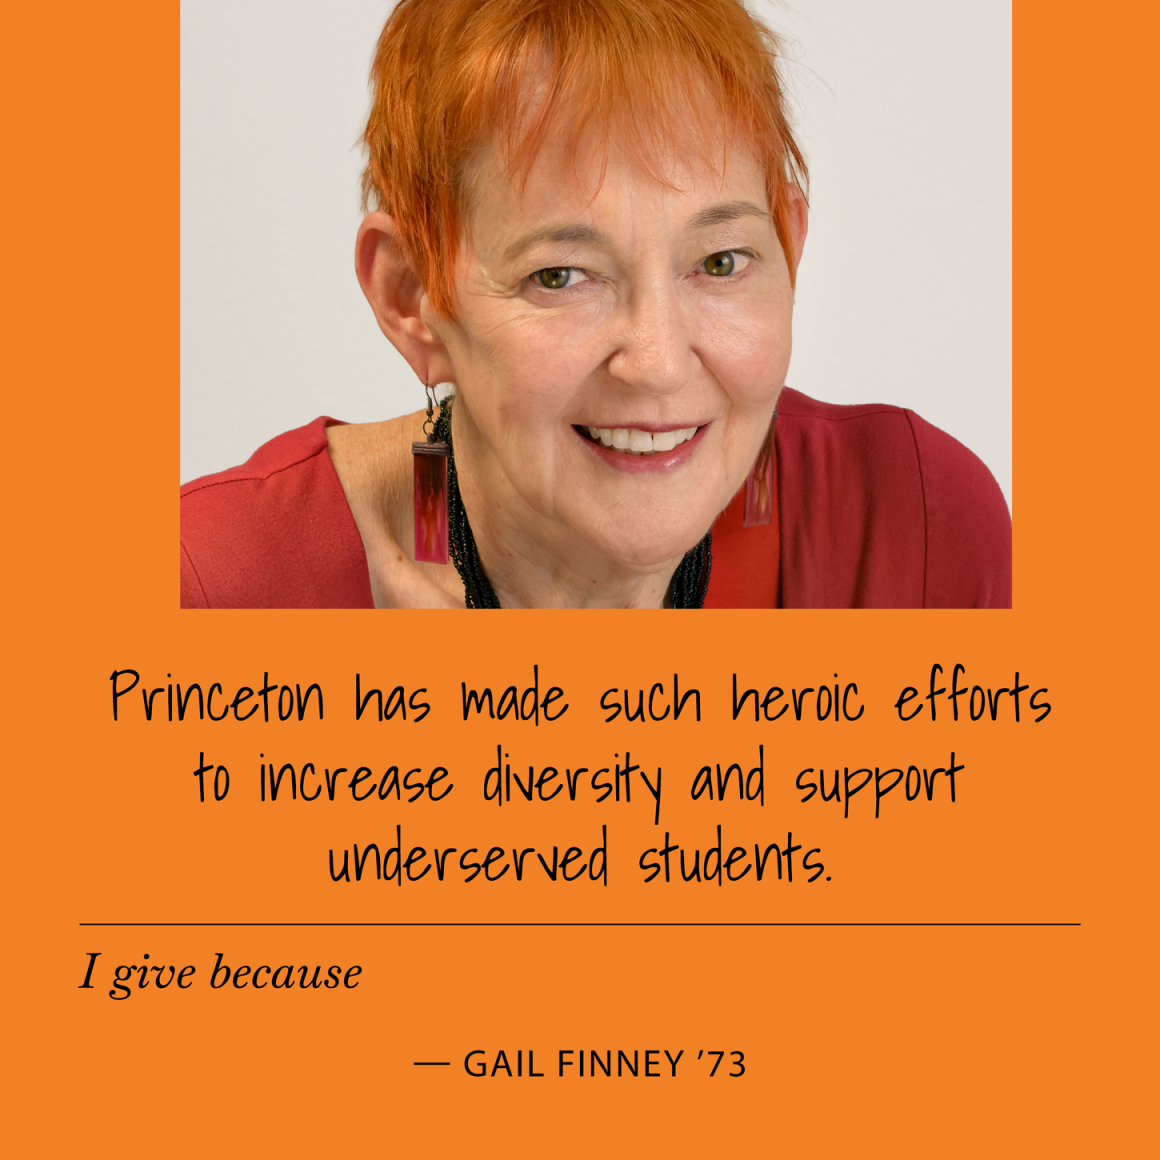 I give because Princeton has made such heroic efforts to increase diversity and support underserved students. Gail Finney '73